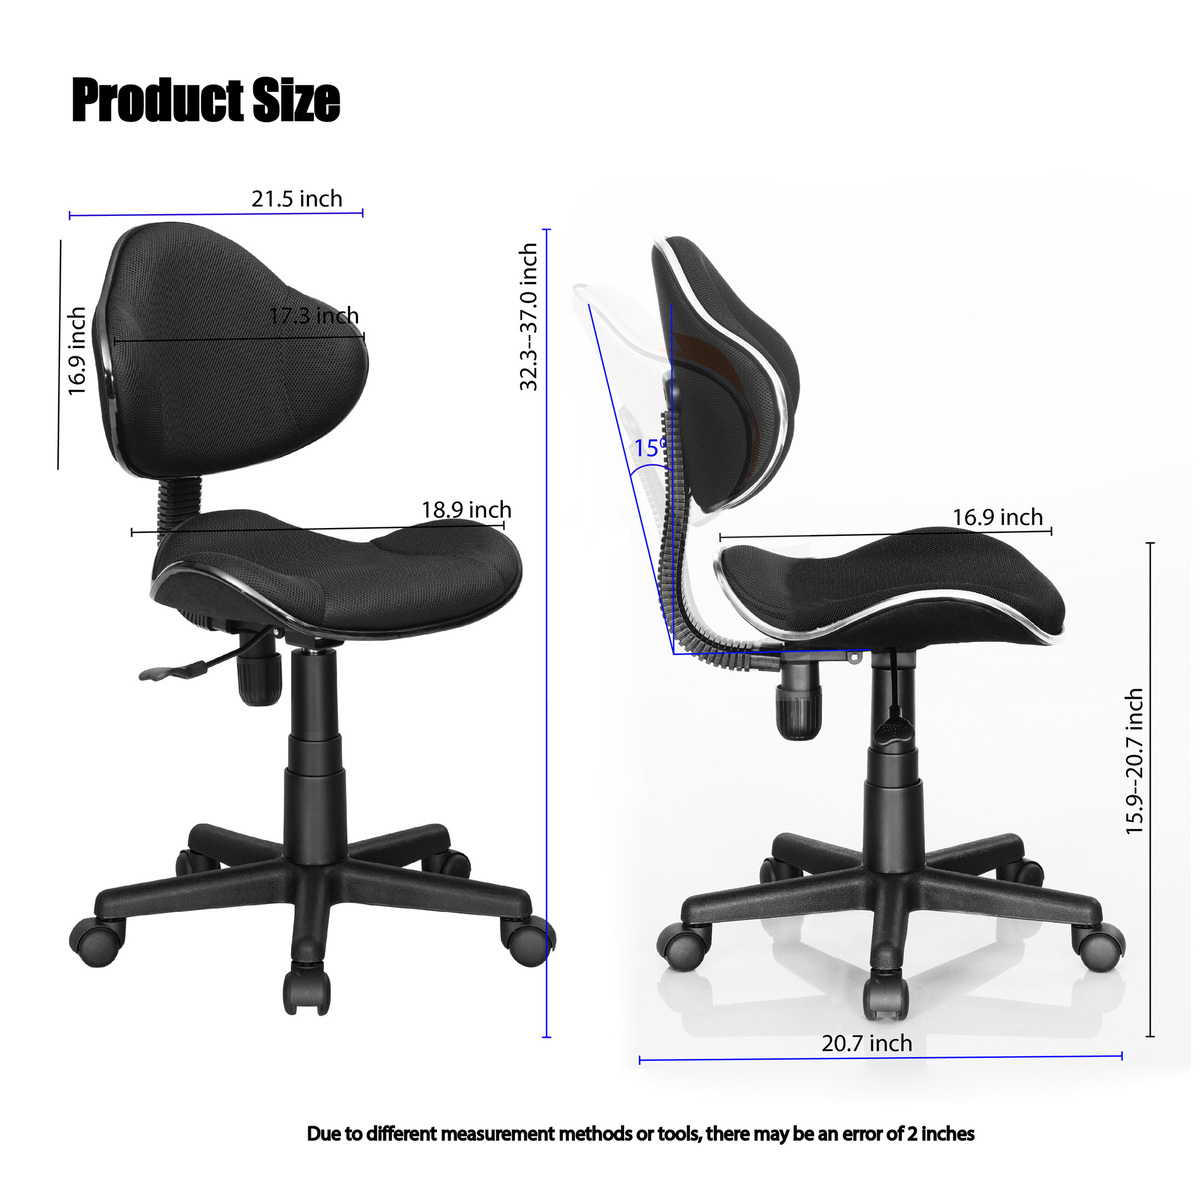 Maple Leaf Adjustable Kids Chair, Office, Computer Chair for Students With Swivel Wheels Black QZYG2B